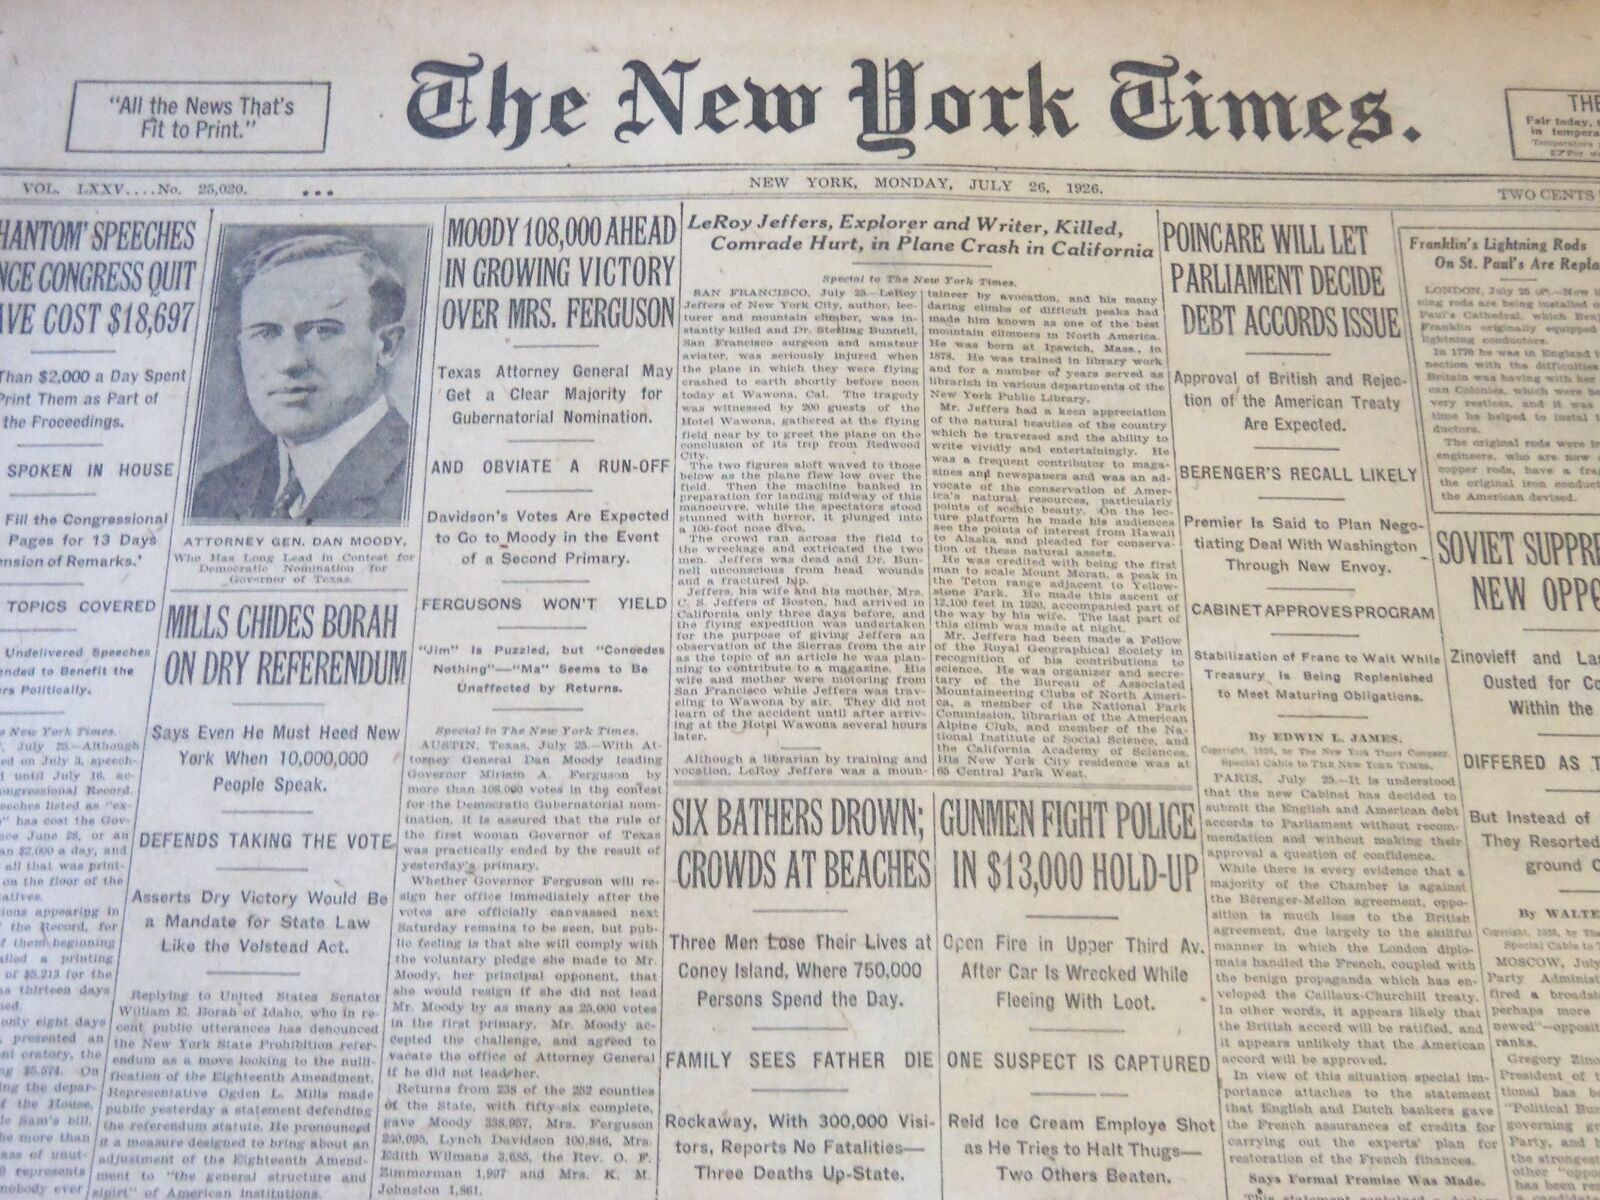 1926 JULY 26 NEW YORK TIMES - LEROY JEFFERS EXPLORER AND WRITER KILLED - NT 6594